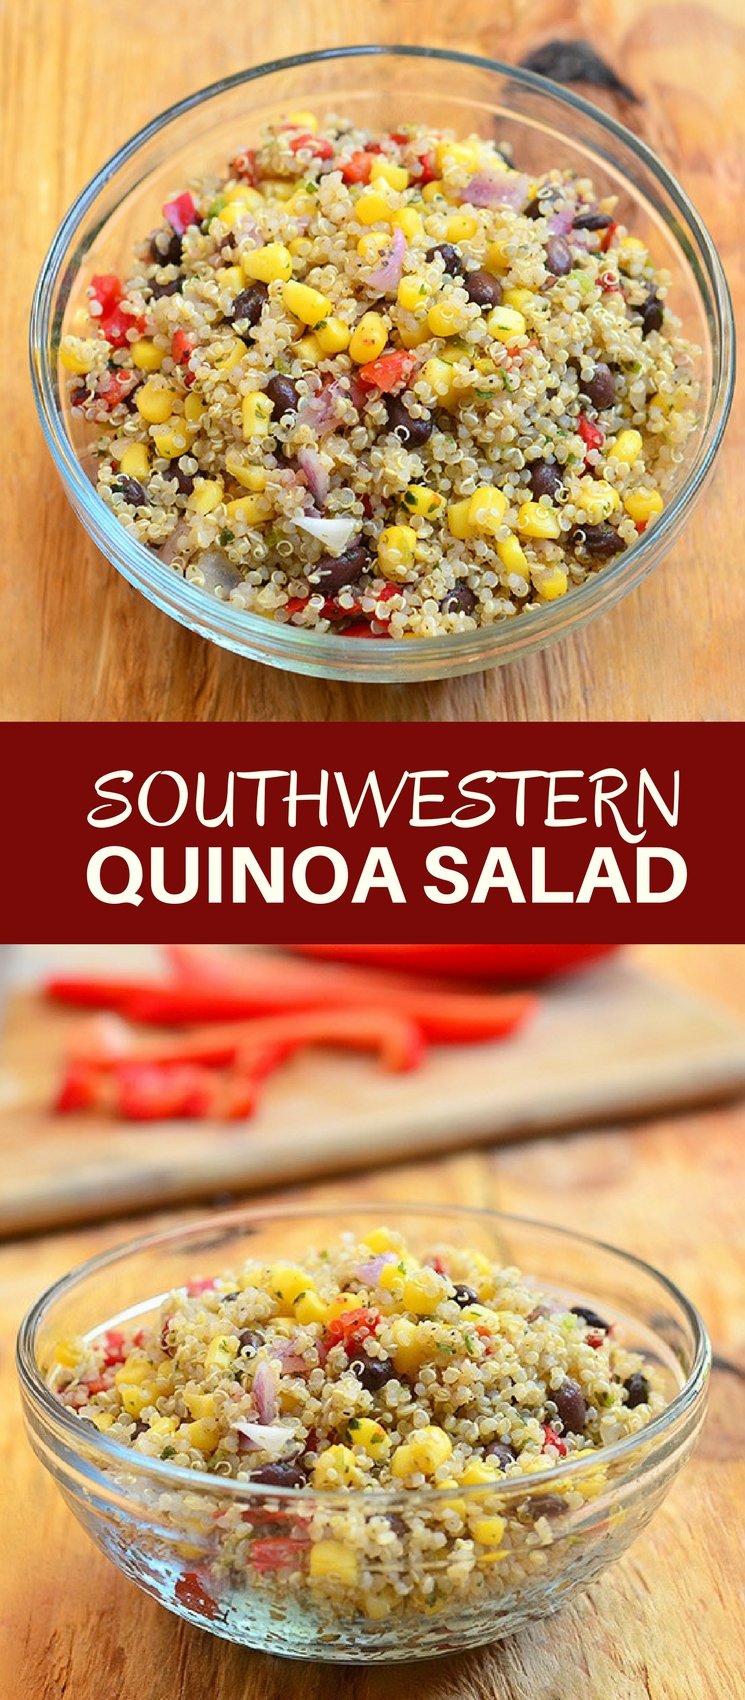 Southwestern Quinoa Salad with quinoa, black beans, corn, bell peppers and lime dressing. Bursting with southwestern flavors, this side dish is delicious as it's nutritious.